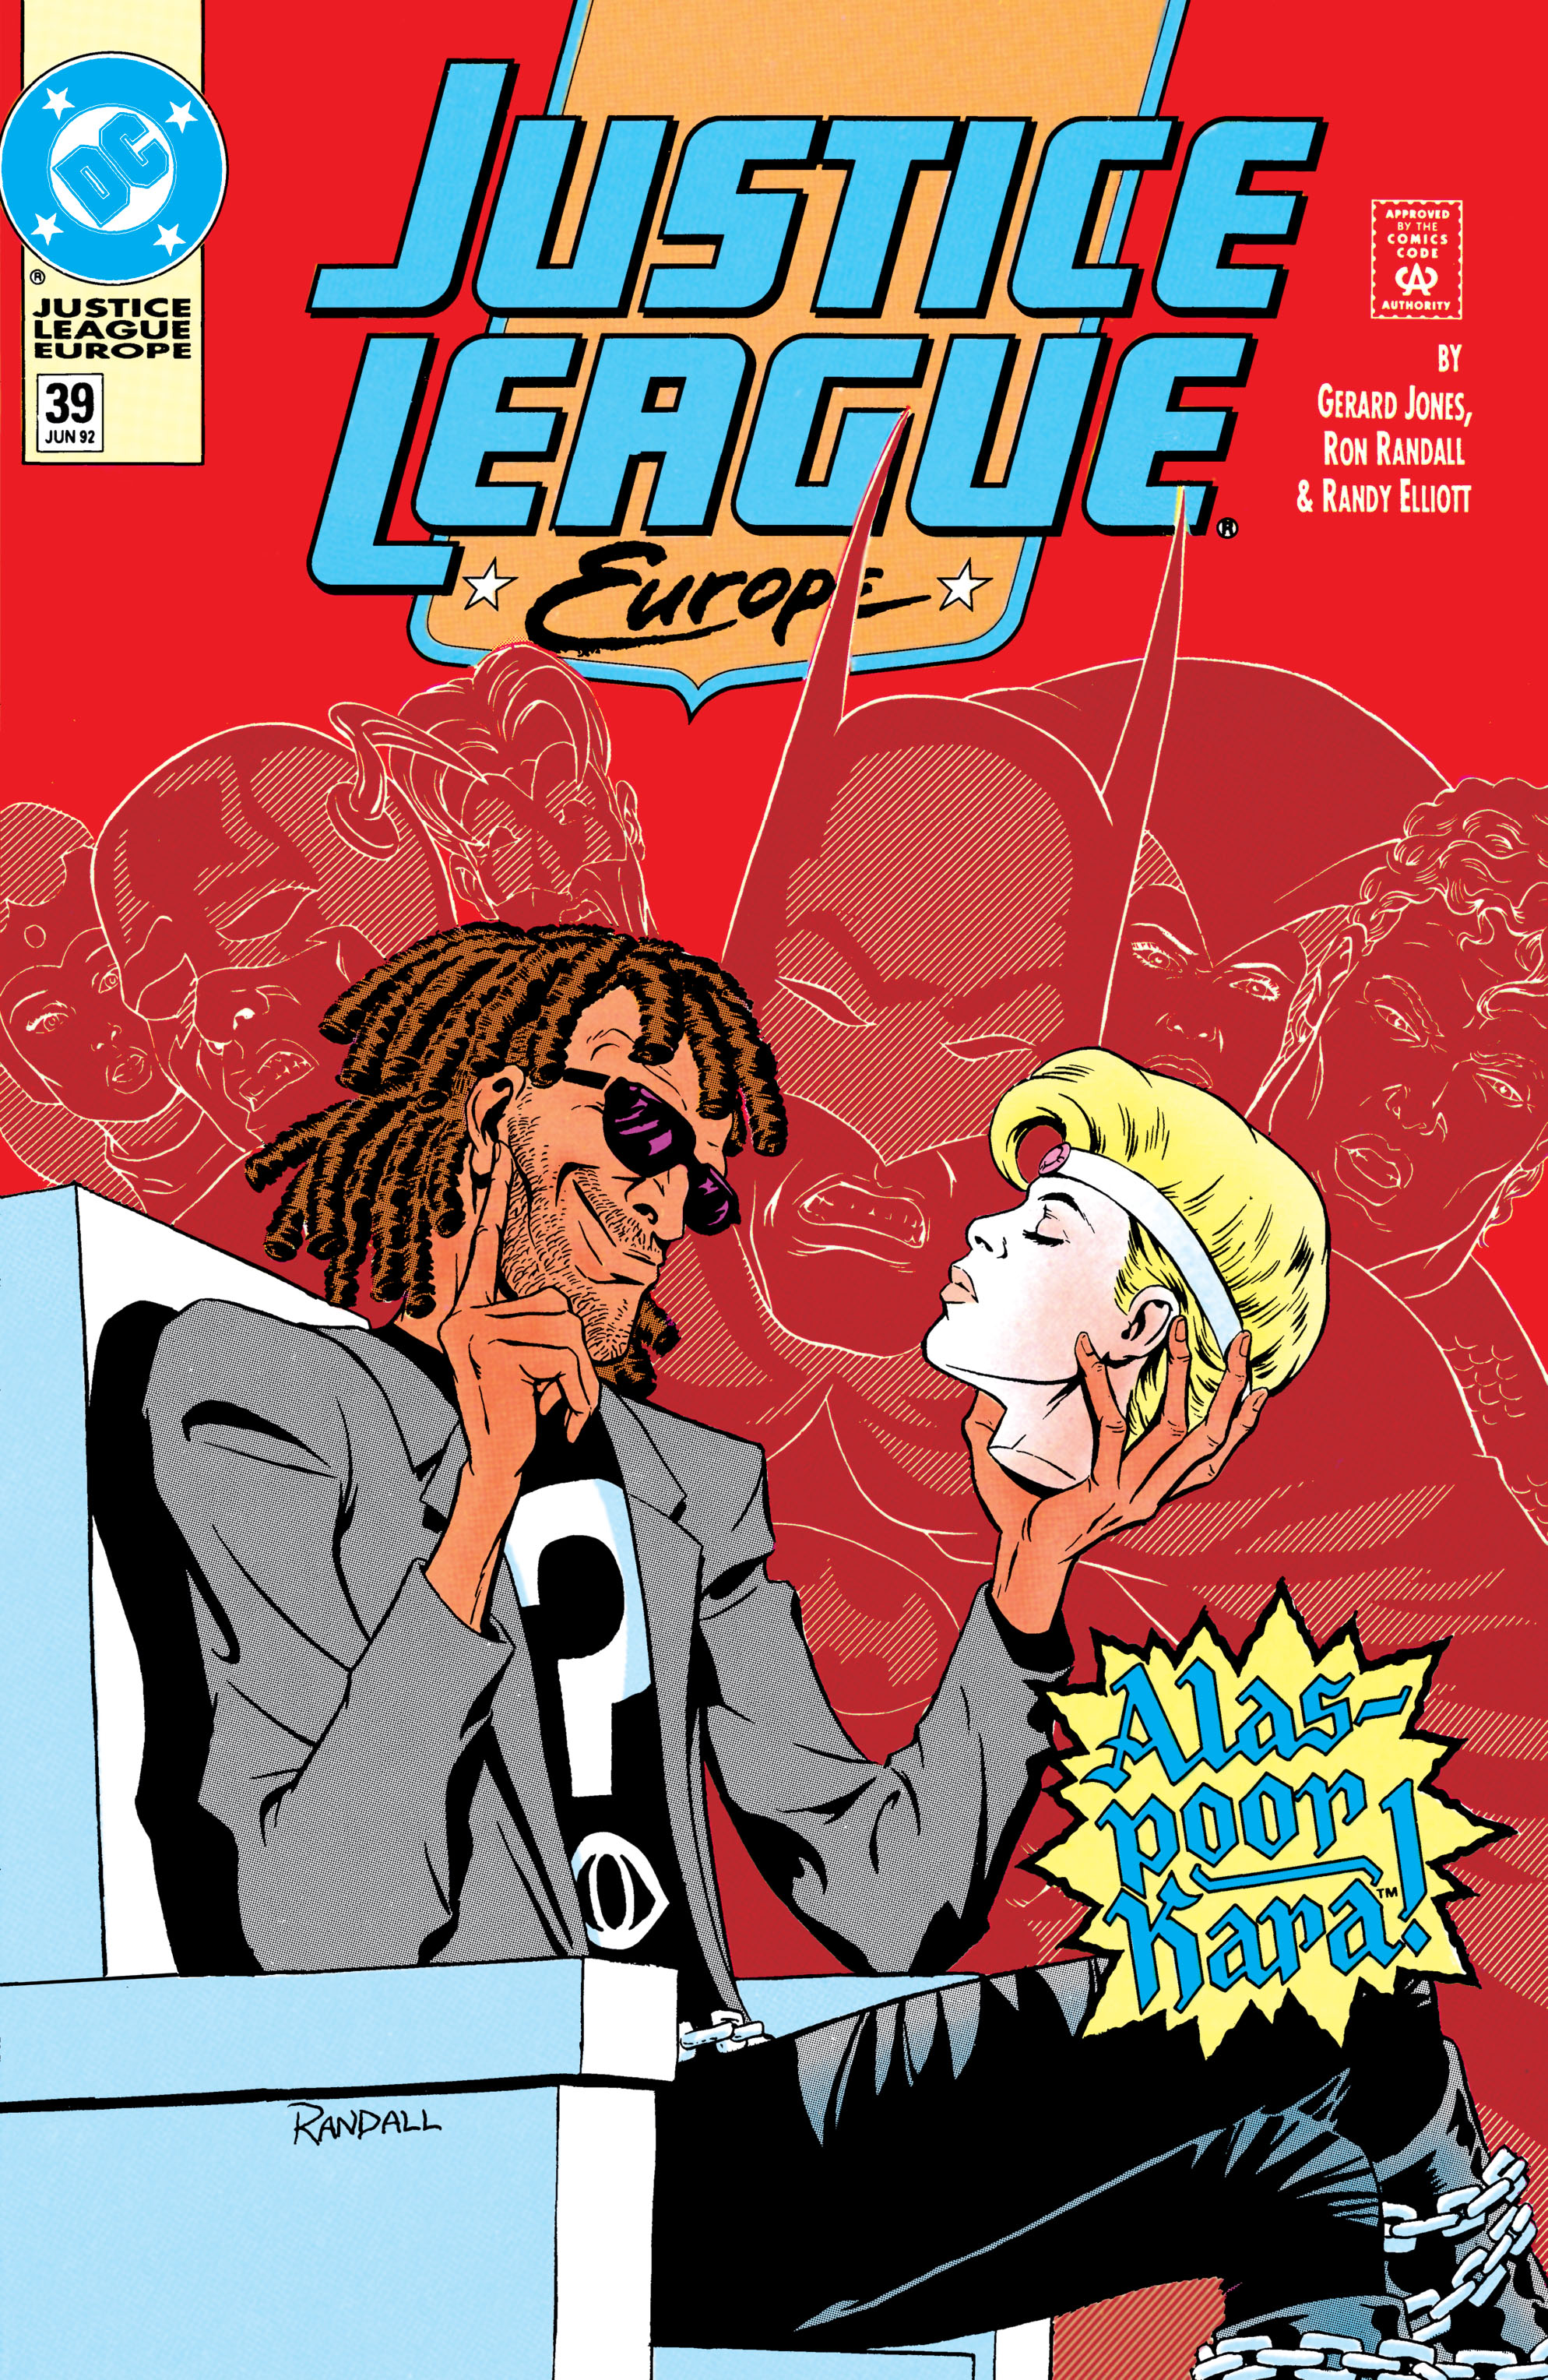 Read online Justice League Europe comic -  Issue #39 - 1